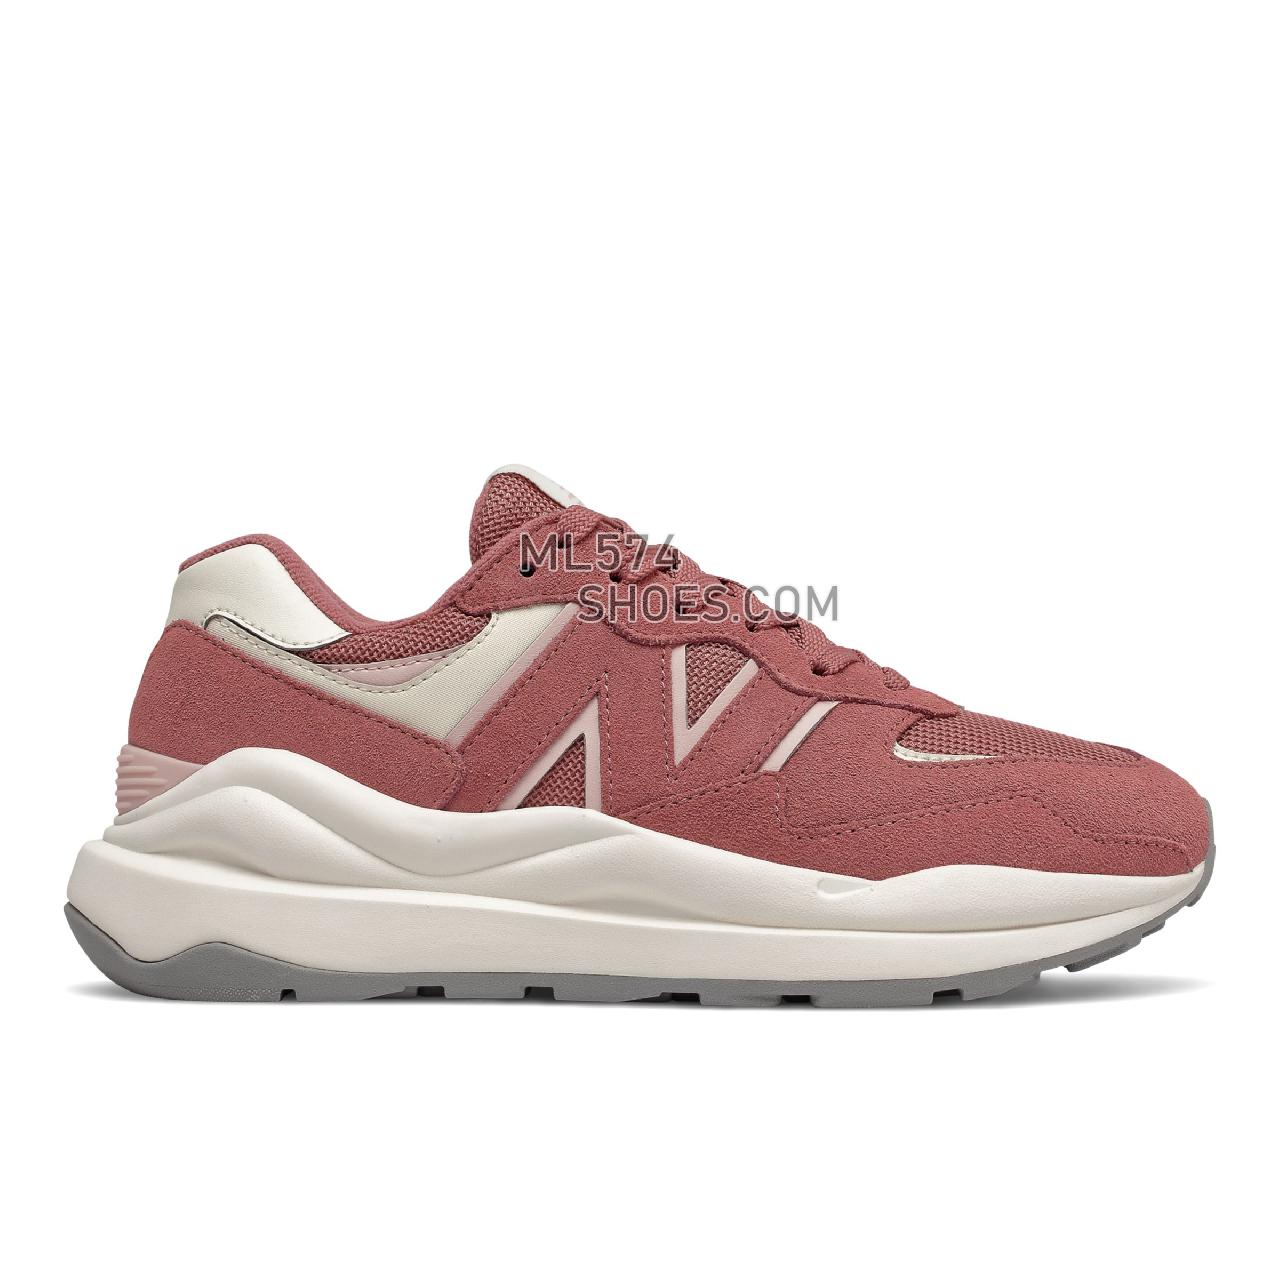 New Balance 57/40 - Women's Classic Sneakers - Washed Henna with Oyster Pink - W5740HG1